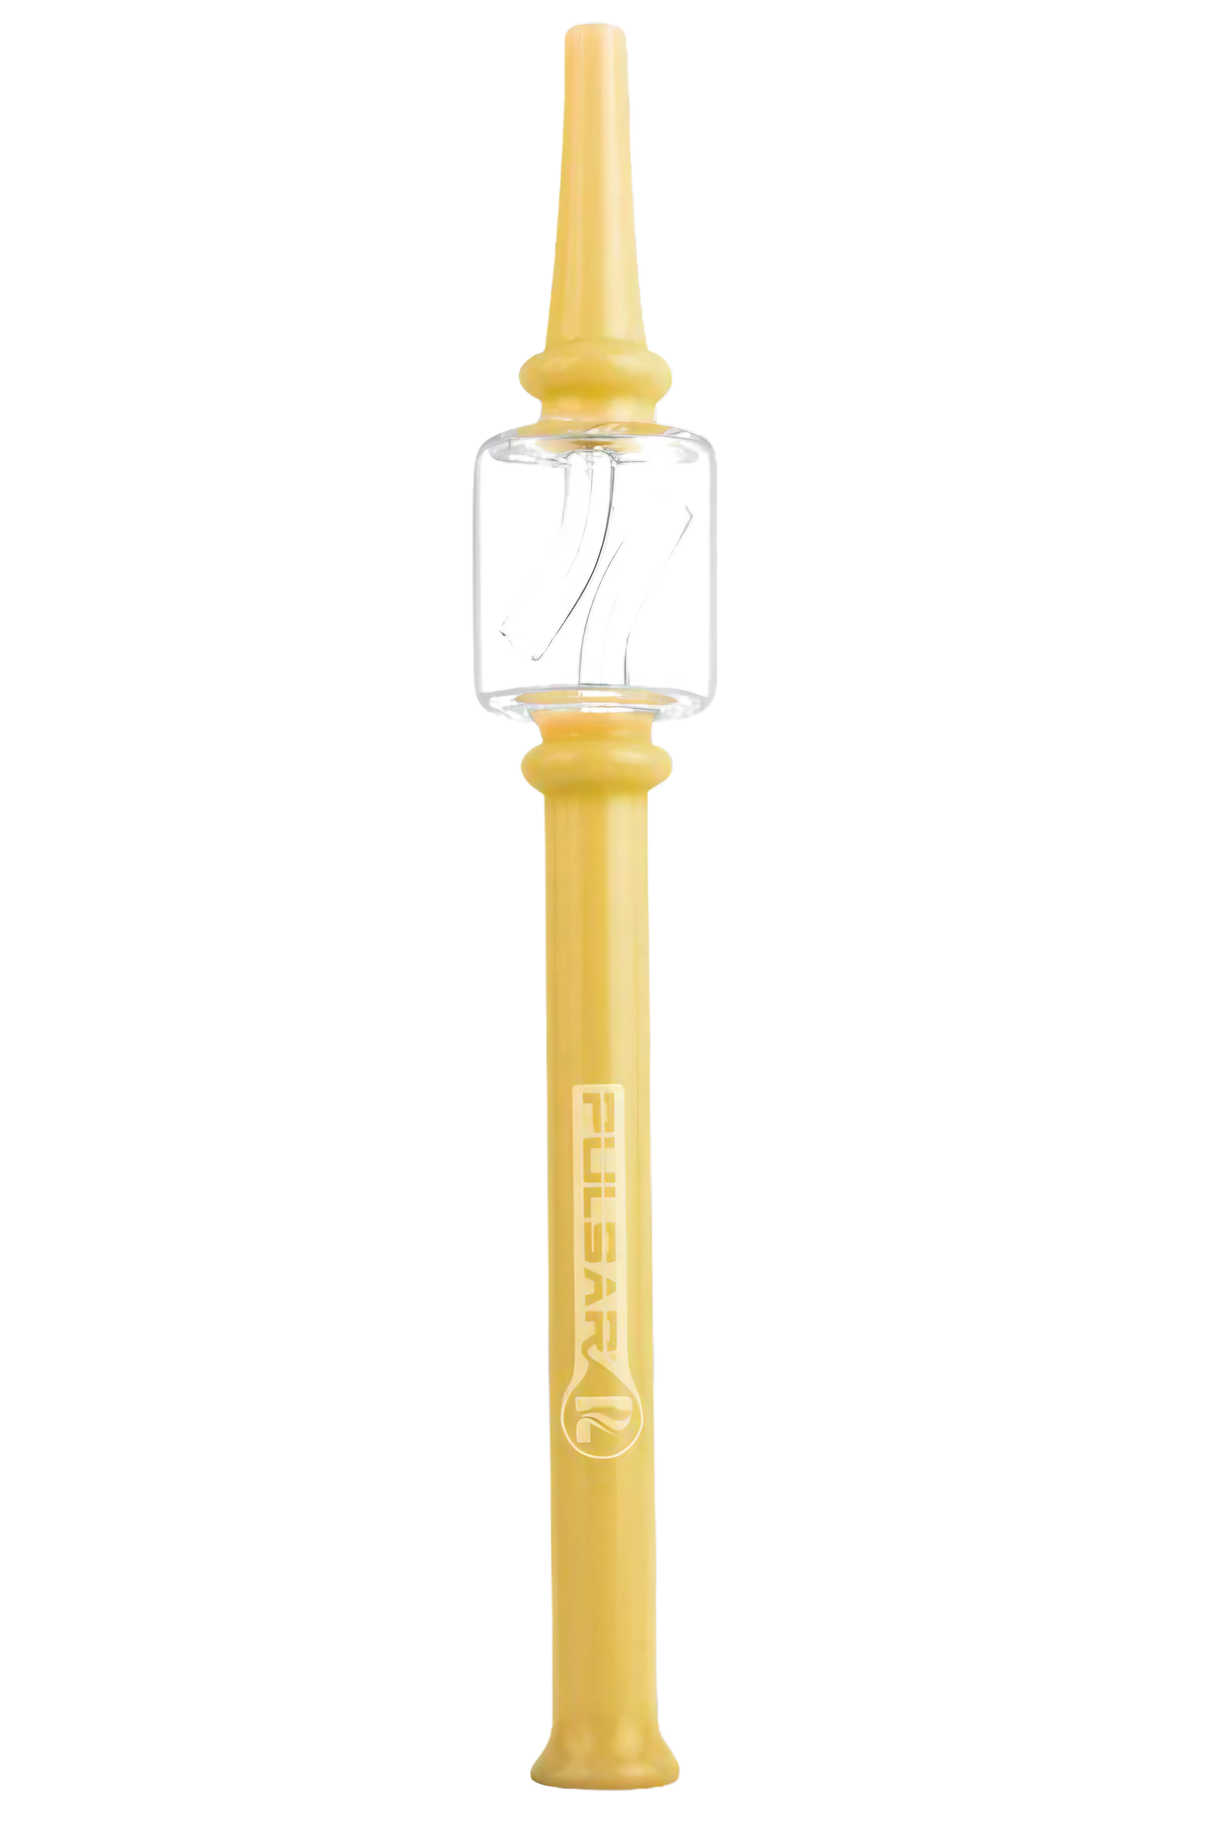 Pulsar Borosilicate Glass Dab Straw in vibrant yellow, 8" tall, perfect for concentrates - front view